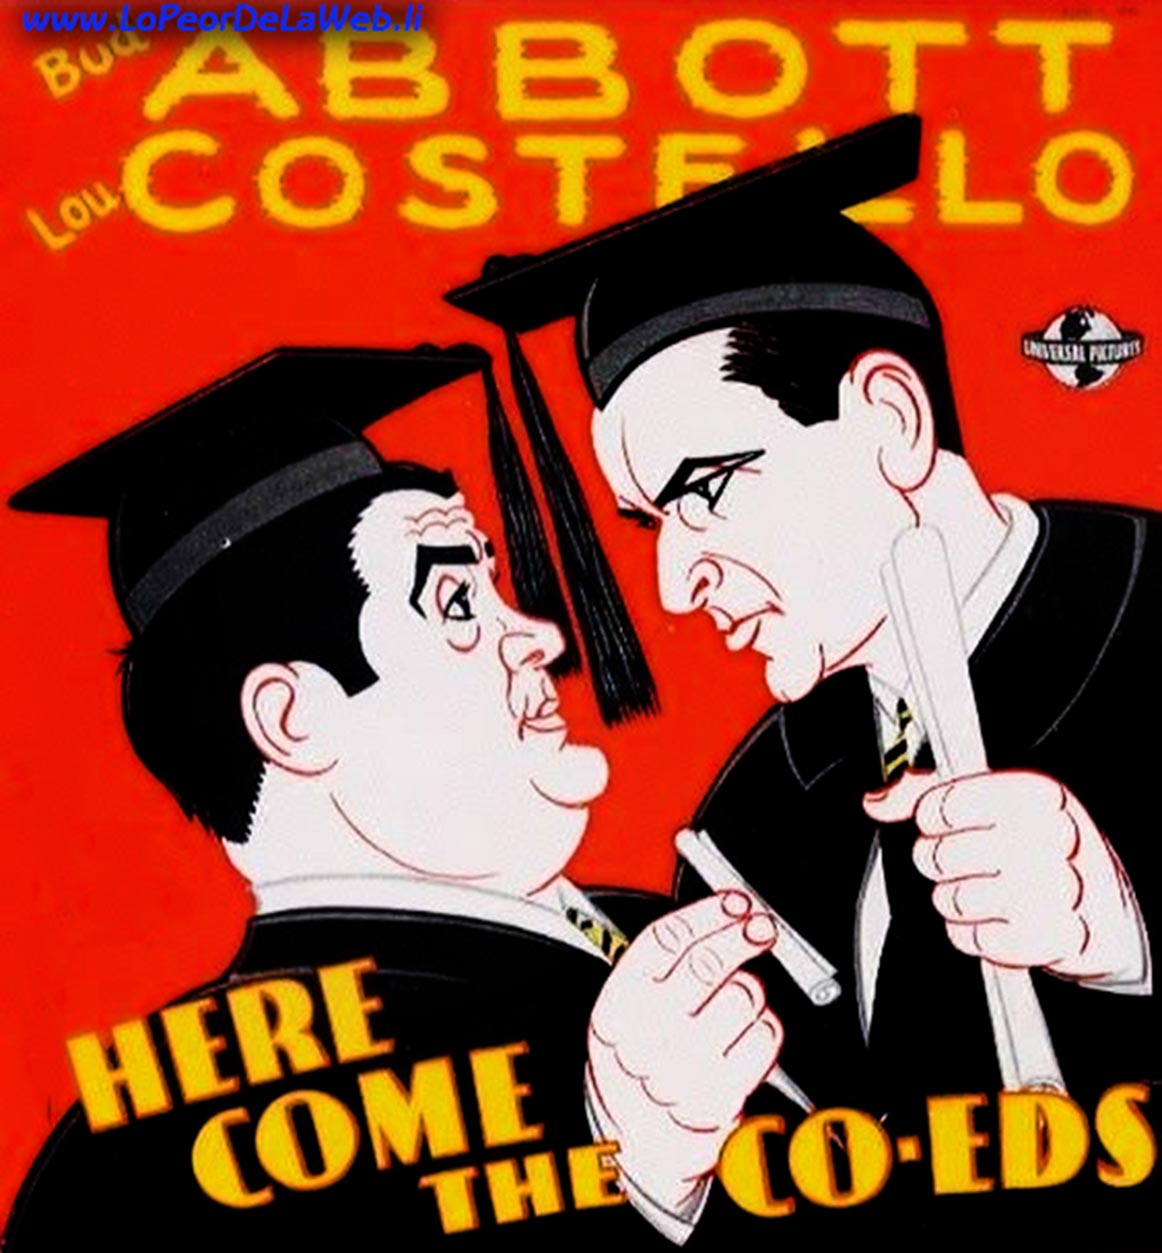 Dos Cabezudos (Abbott y Costello/1945/Here Come the Co-Eds)